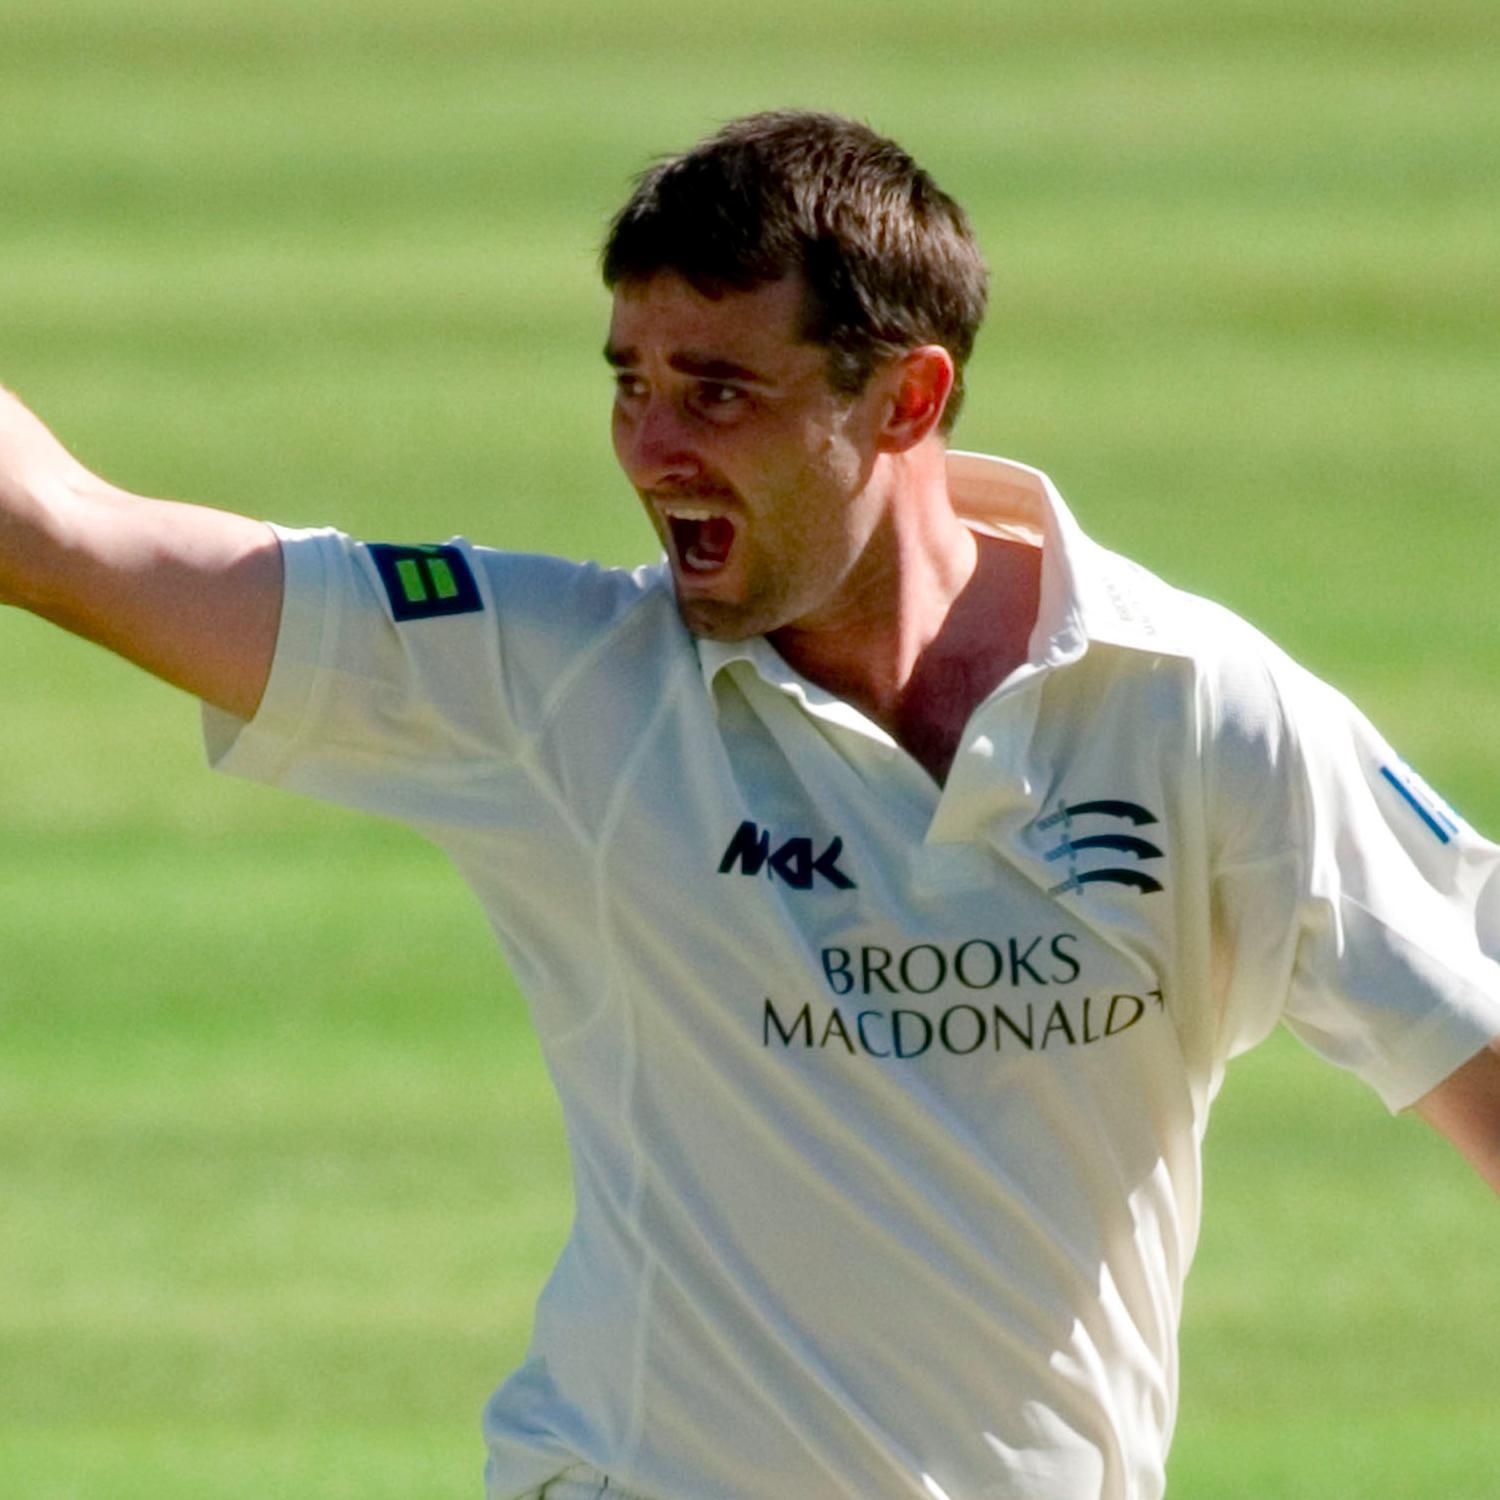 News and info regarding @Middlesex_CCC and @Irelandcricket @tjmurtagh's 2015 benefit year